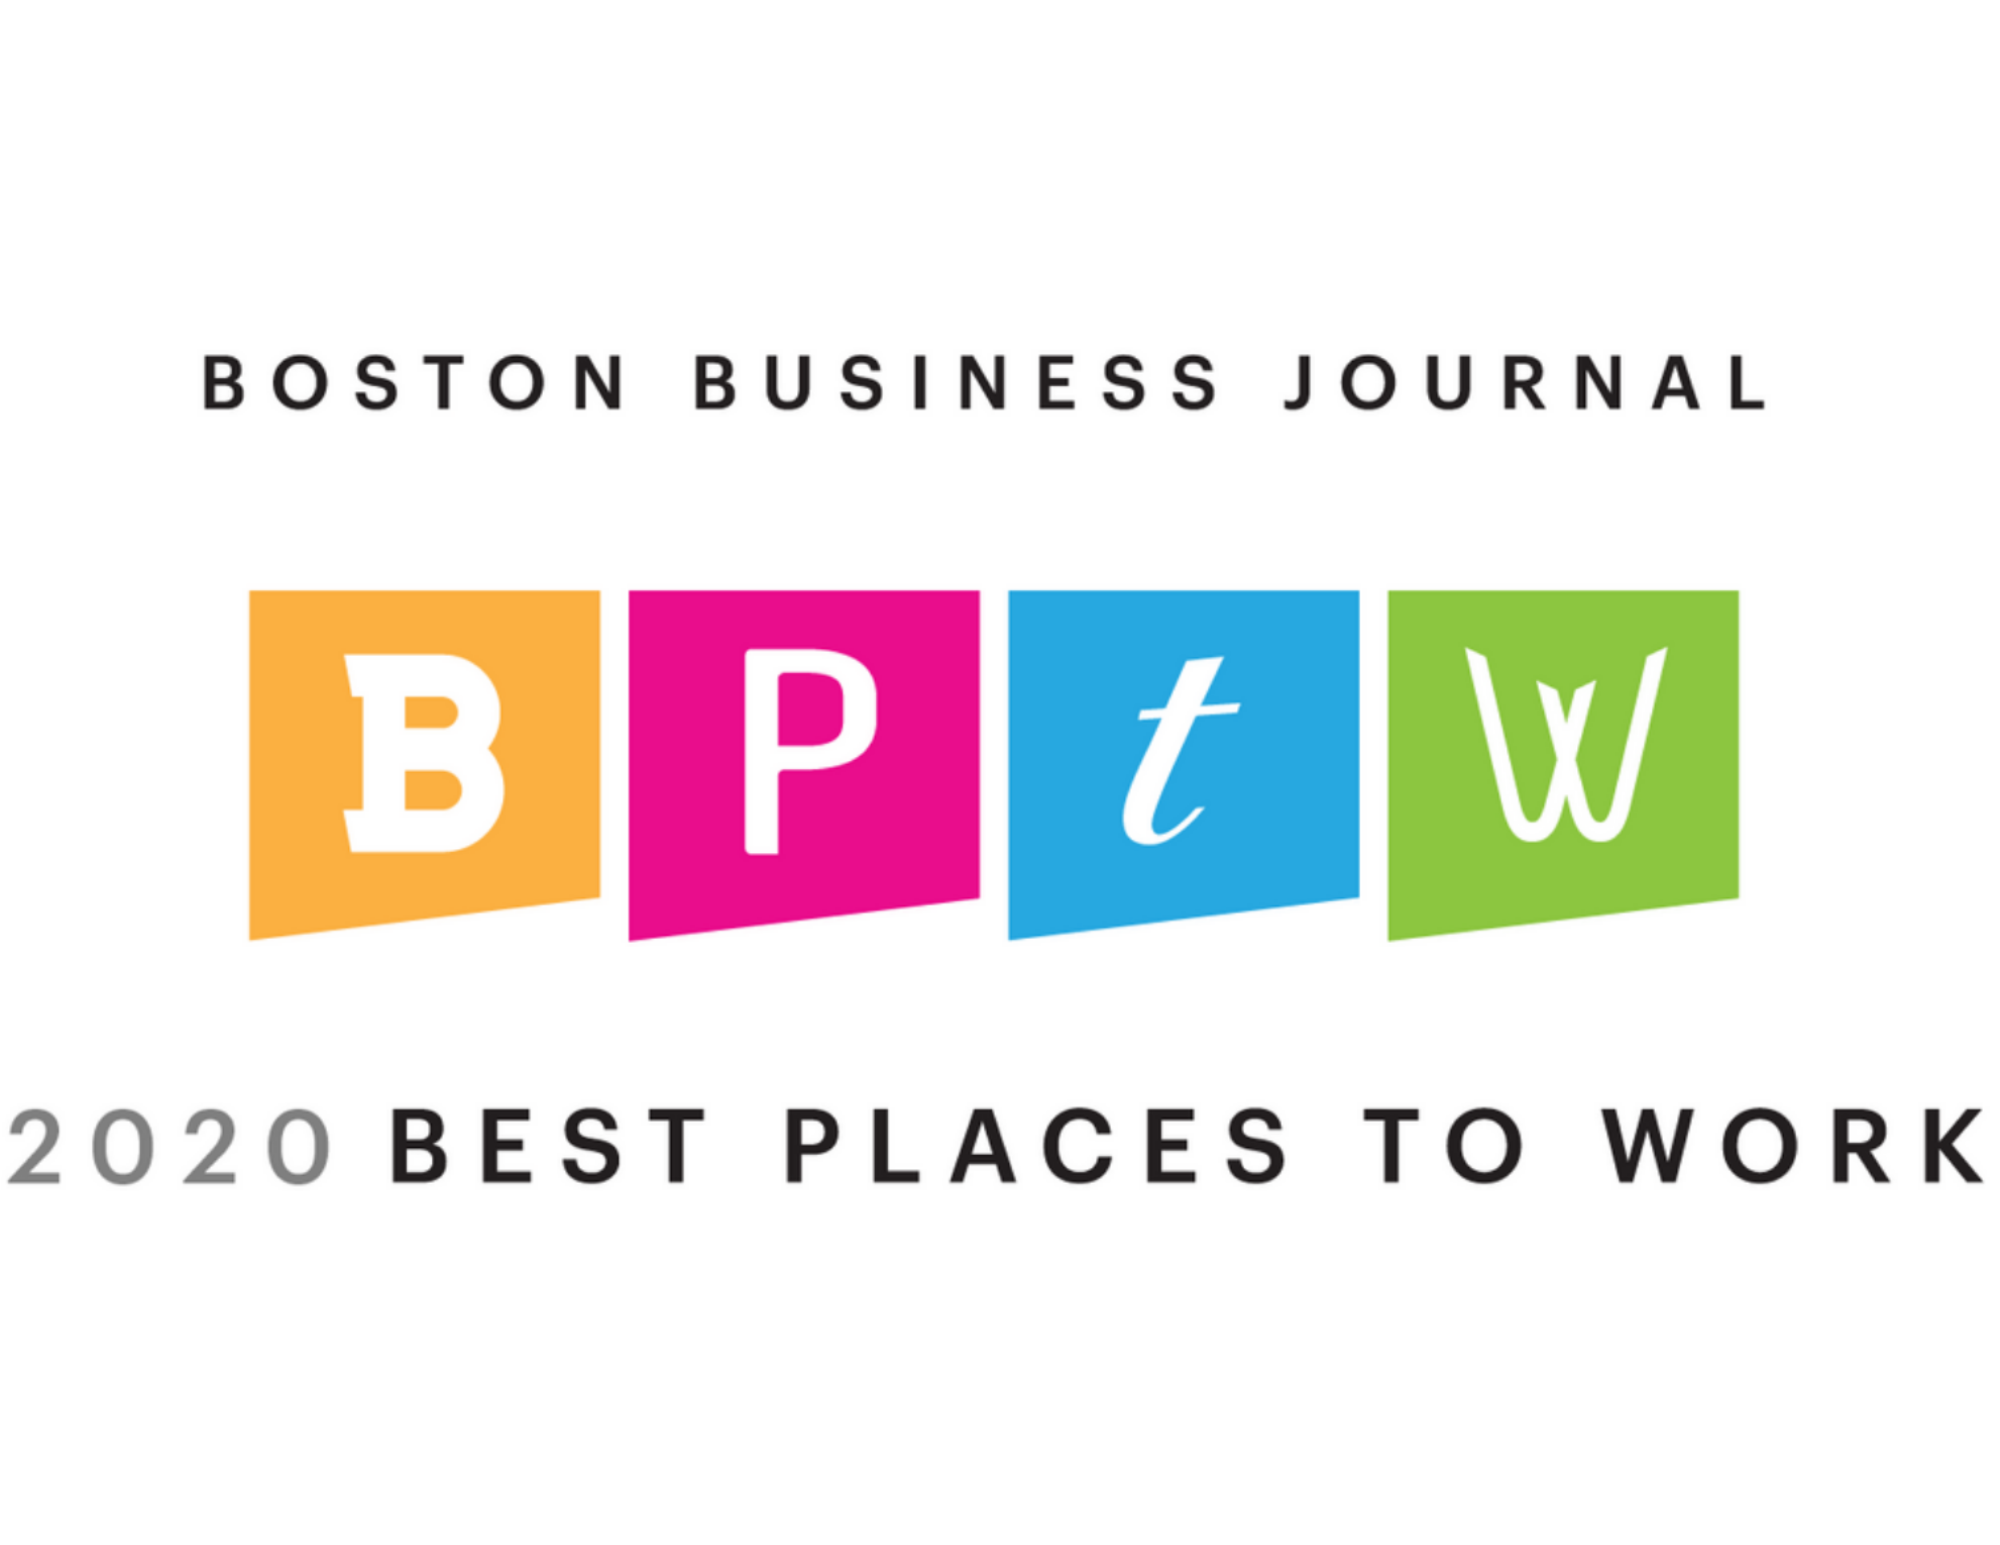 Boston Business Journal Announces Best Places to Work Rankings